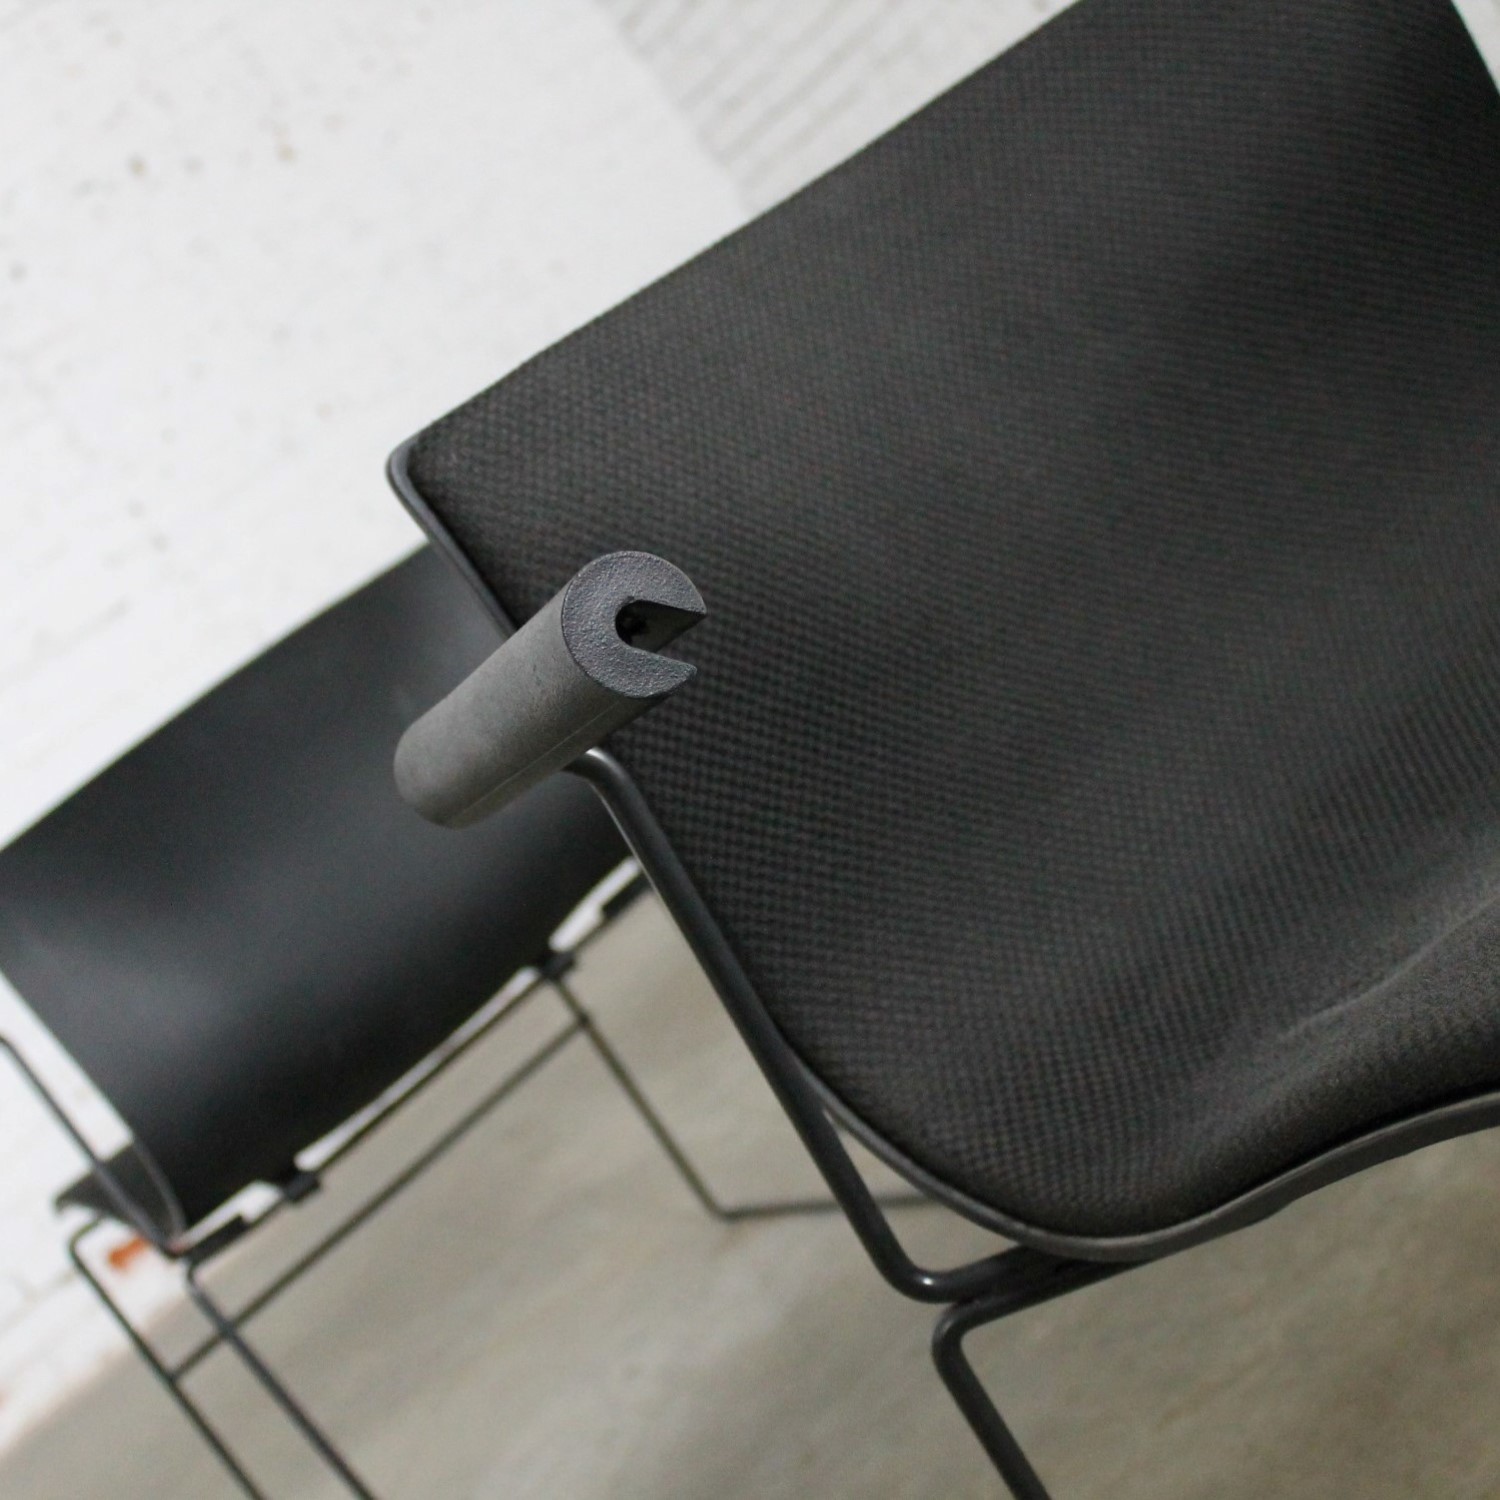 Vintage Black Handkerchief Arm Chairs by Massimo and Lella Vignelli for Knoll Set of Six